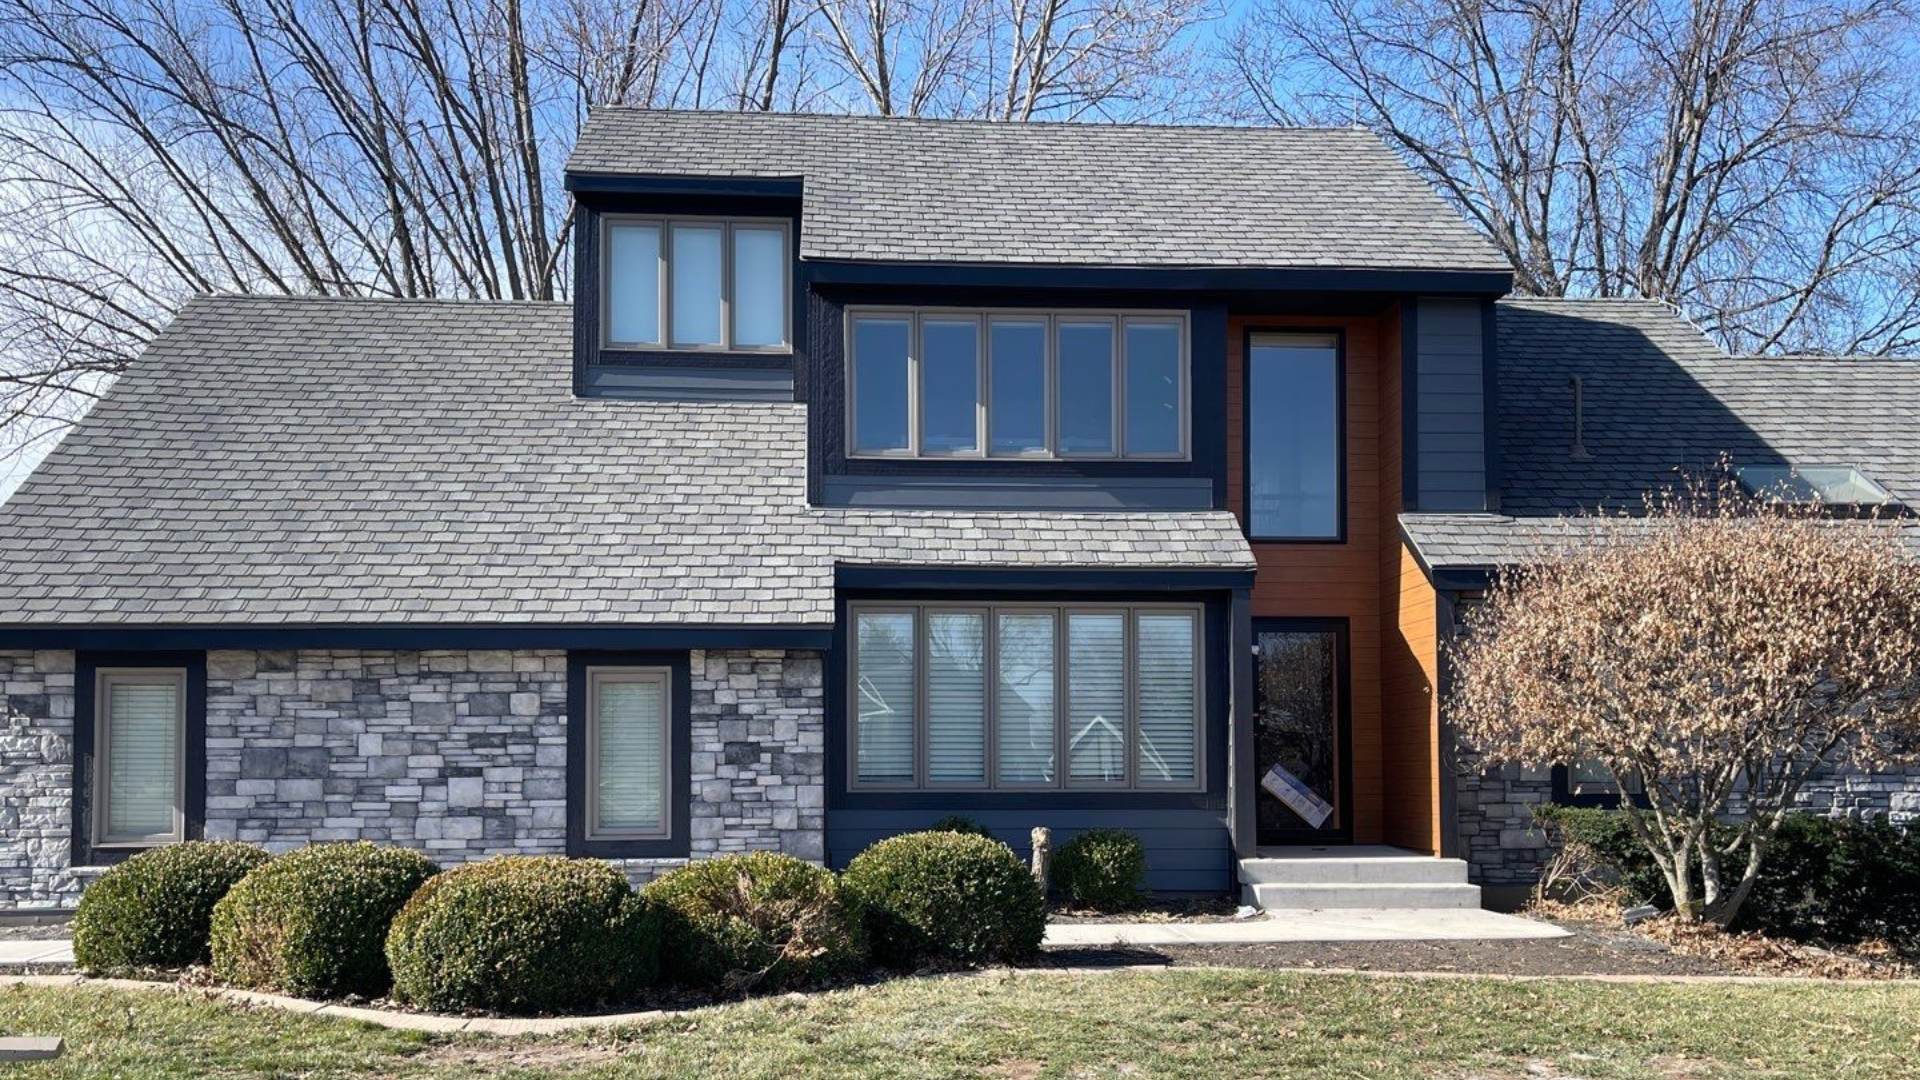 Smart Exteriors updates Overland Park home by installing Night Gray James Hardie siding